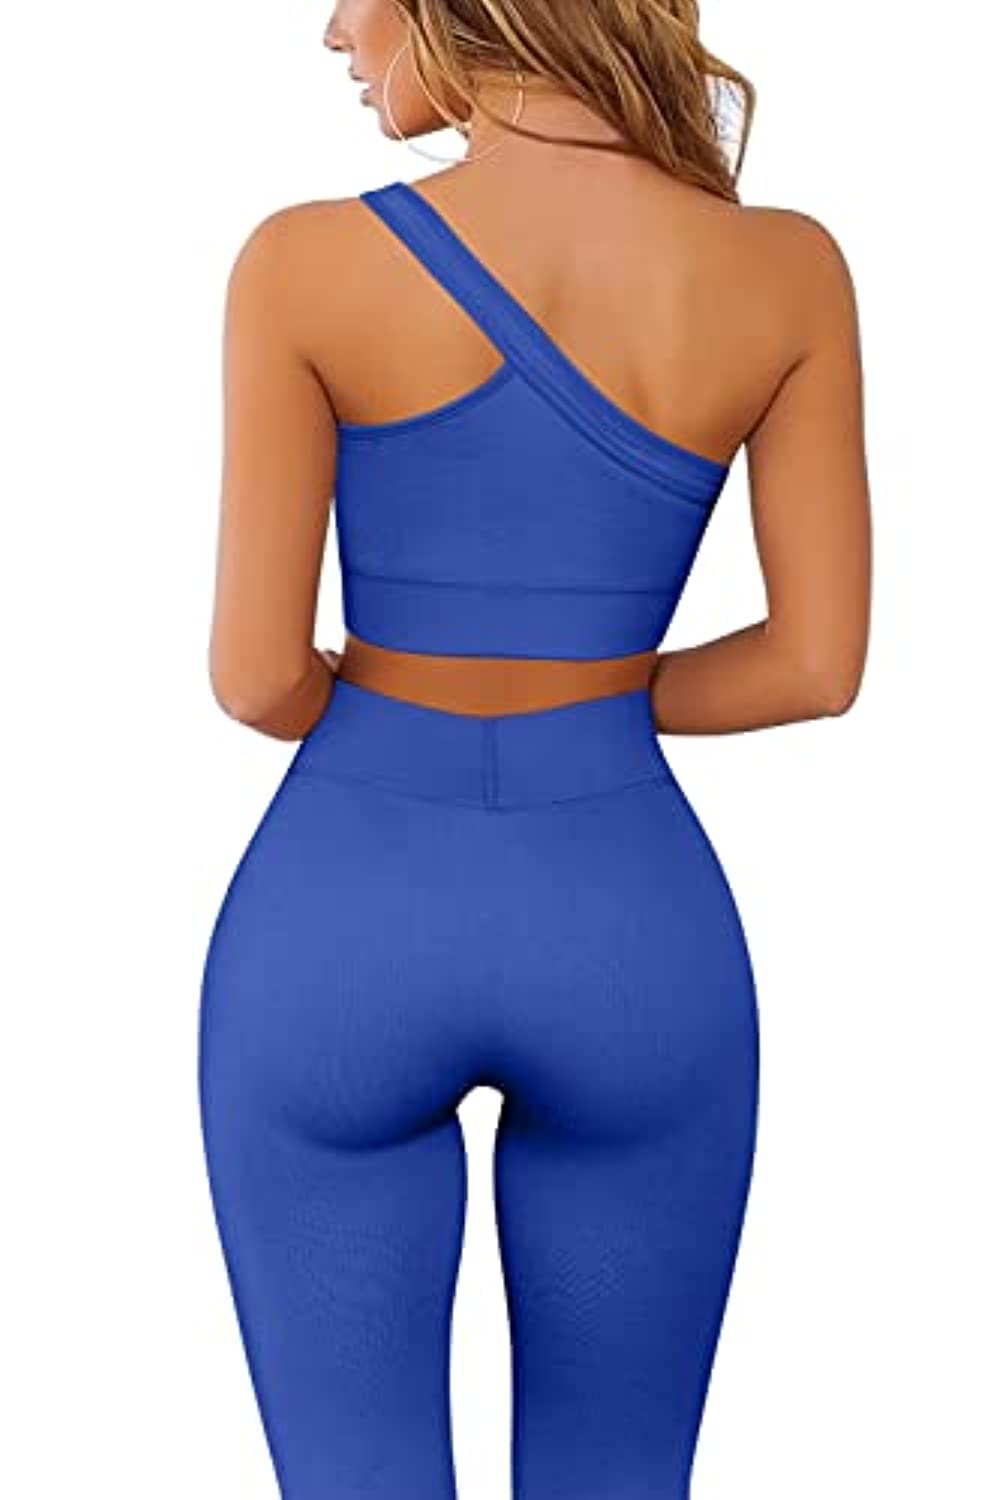 QINSEN Seamless Ribbed GMY Yoga 2 Piece Outfits for Women One Shoulder Sport Bra High Waist Leggings Workout Sets